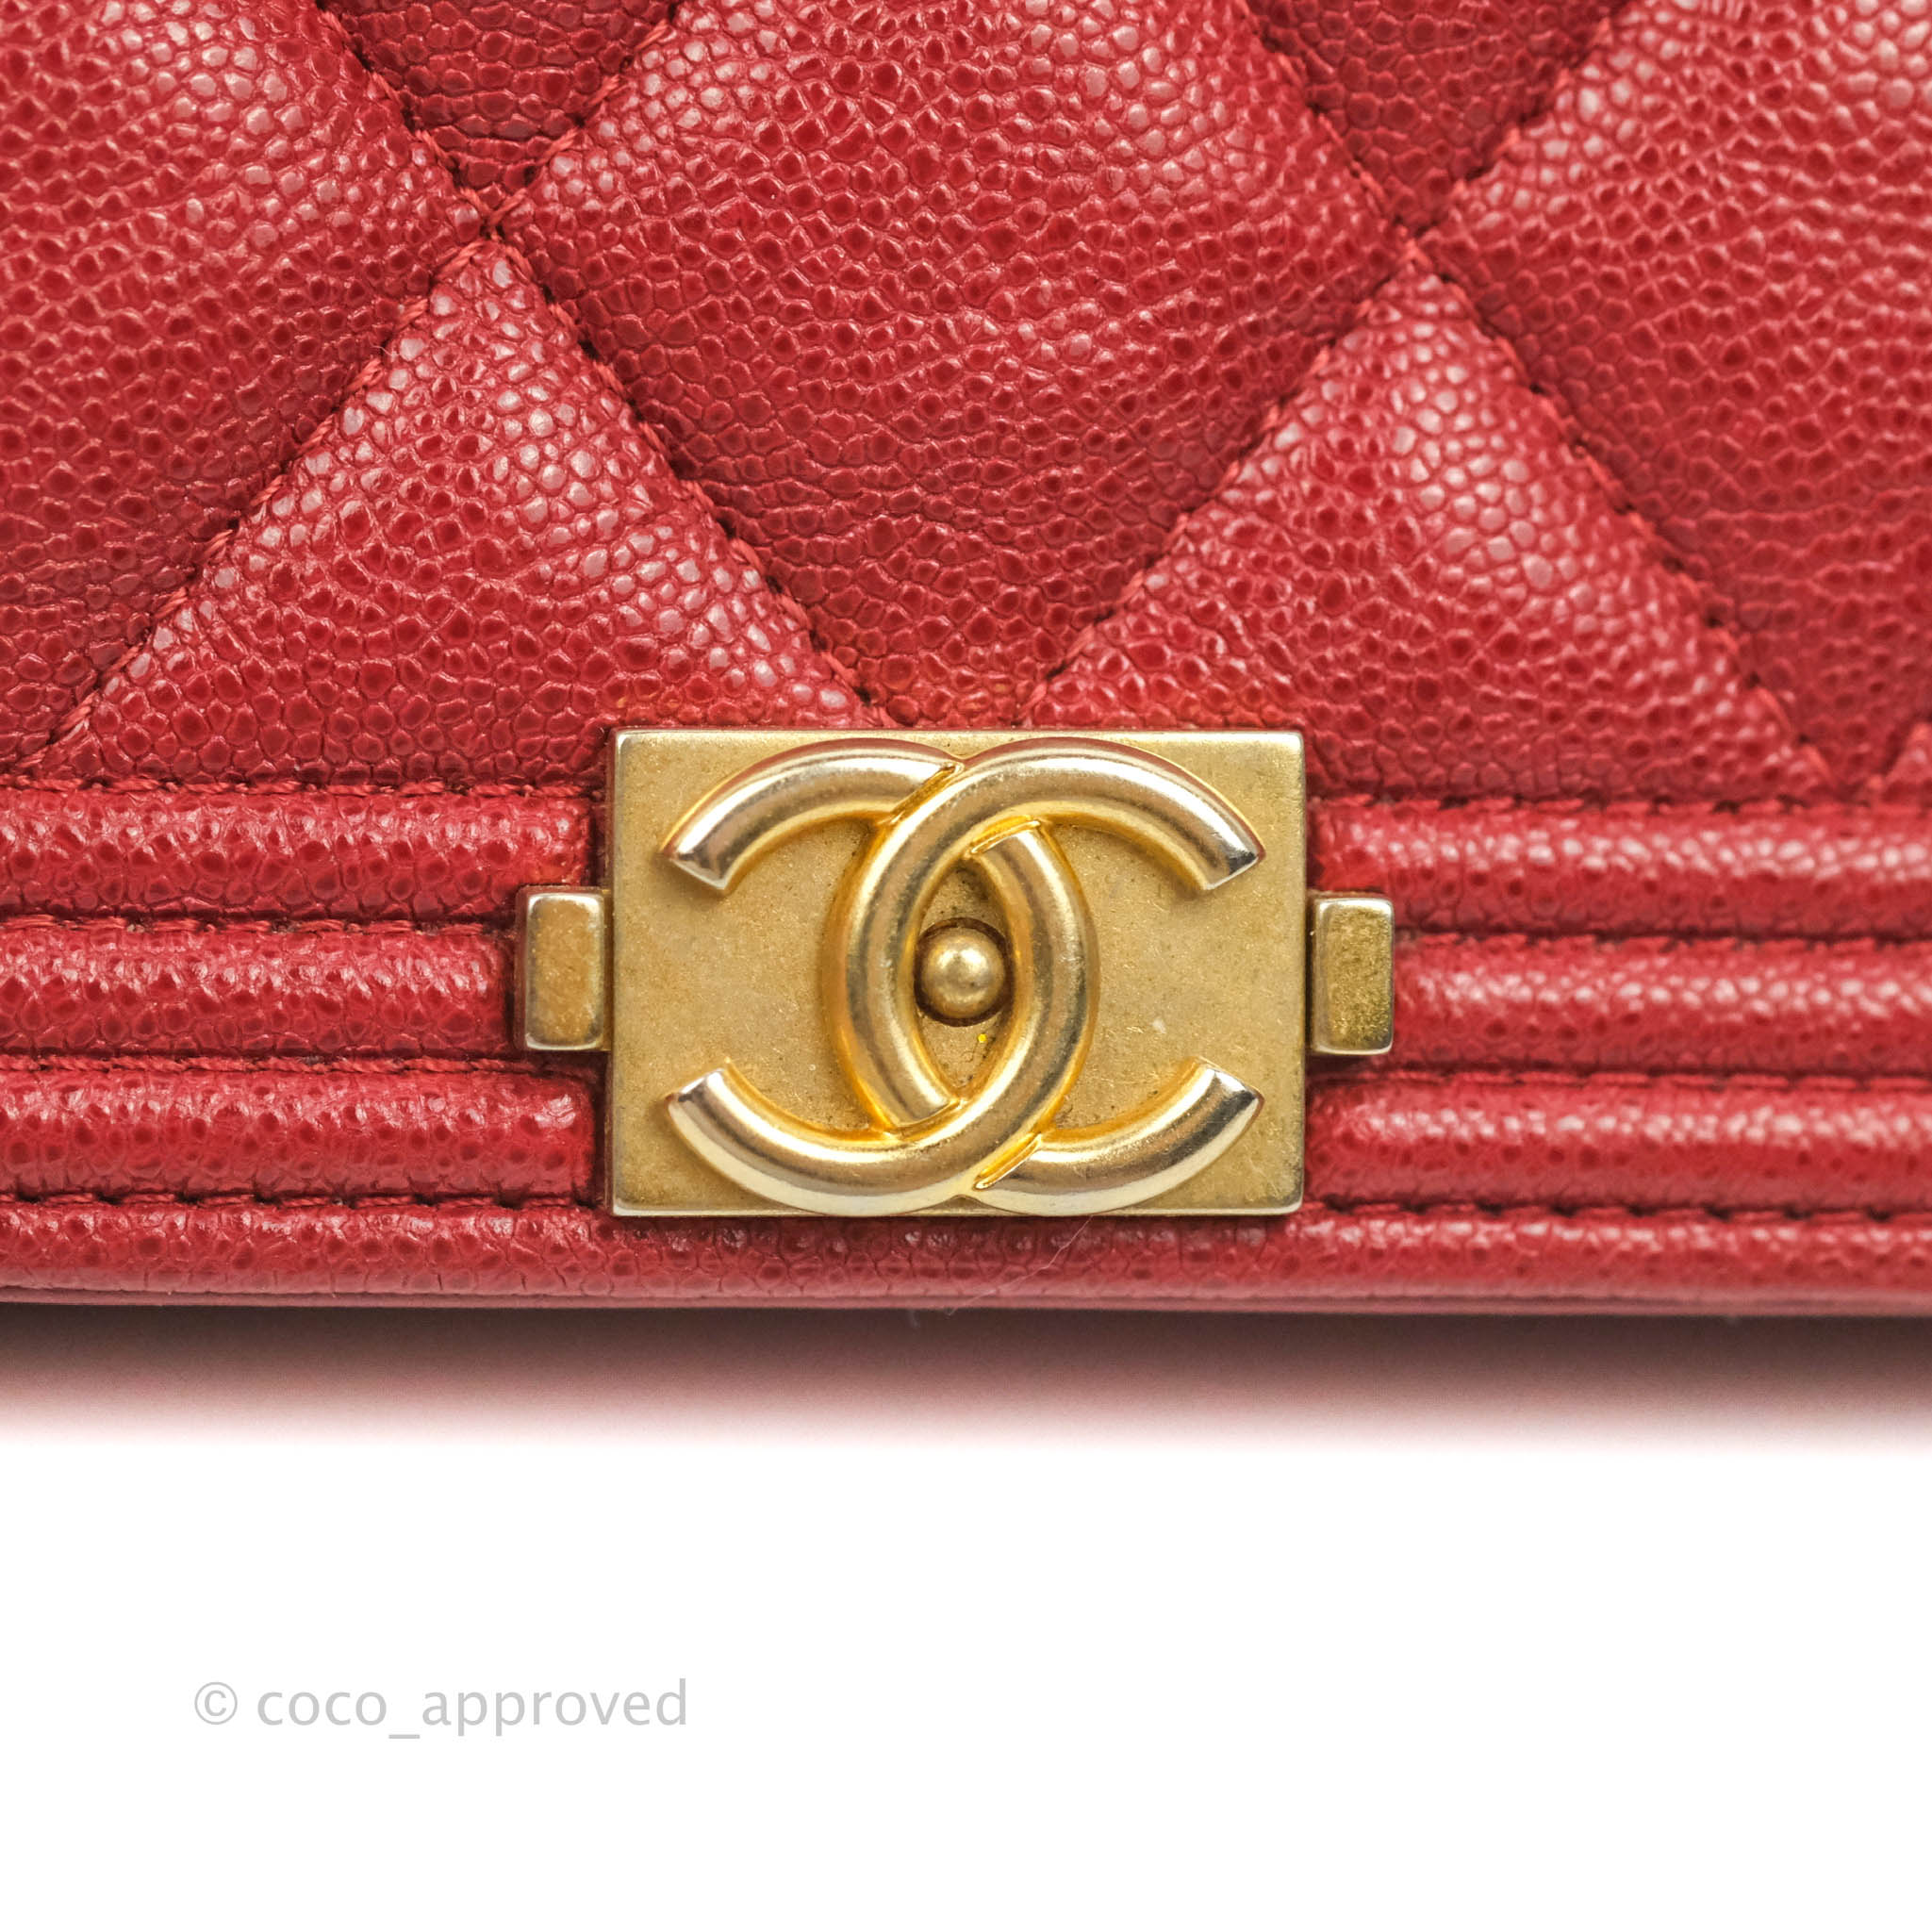 Chanel Wallet On Chain Quilted Diamond Red in Caviar with Matte